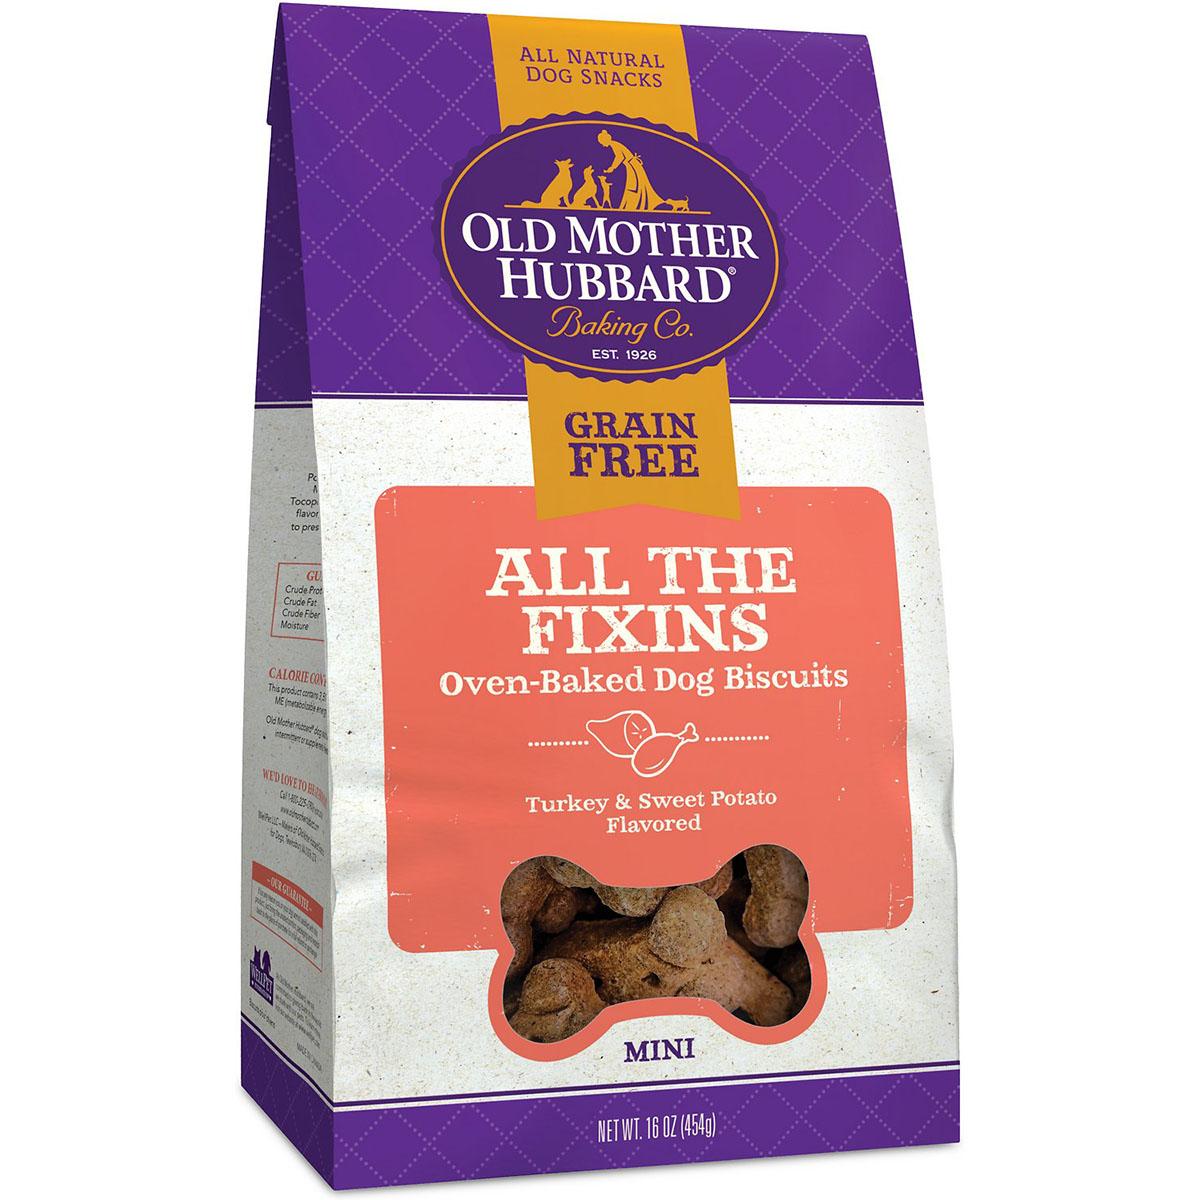 Old Mother Hubbard Mini All the Fixins Grain-Free Biscuits Baked Dog Treats